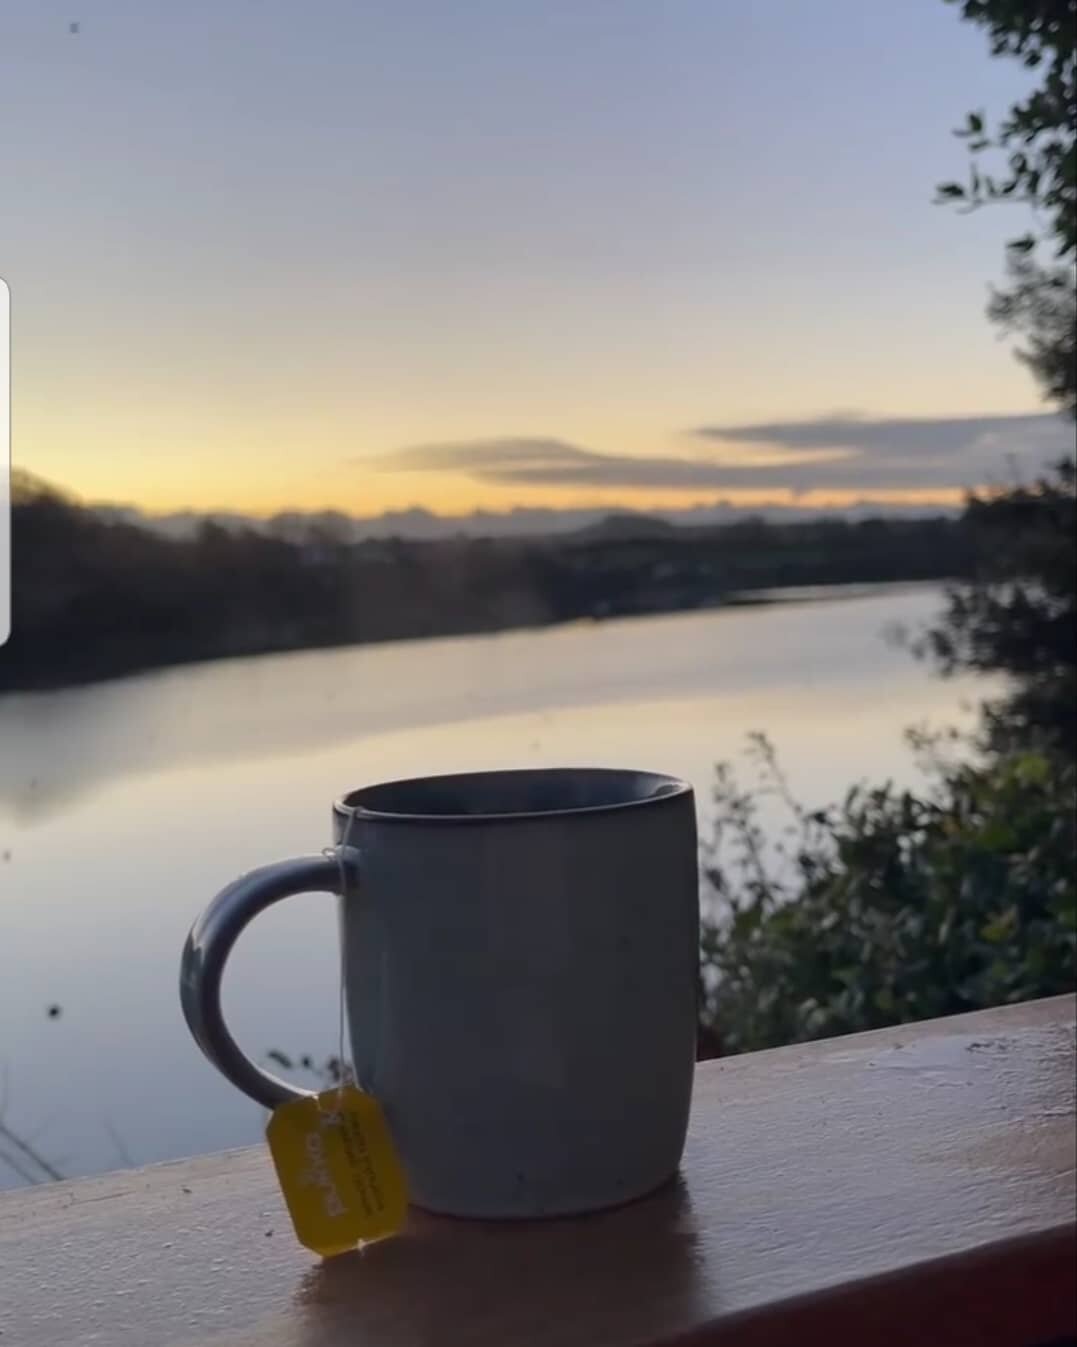 Thanks for capturing the low winter sun at the boathouse so beautifully last week @niomismart . 

It's such a peaceful place to spend  a couple of days planning new projects, reading a book, trying new gins, making a slow breakfast, watching the tide